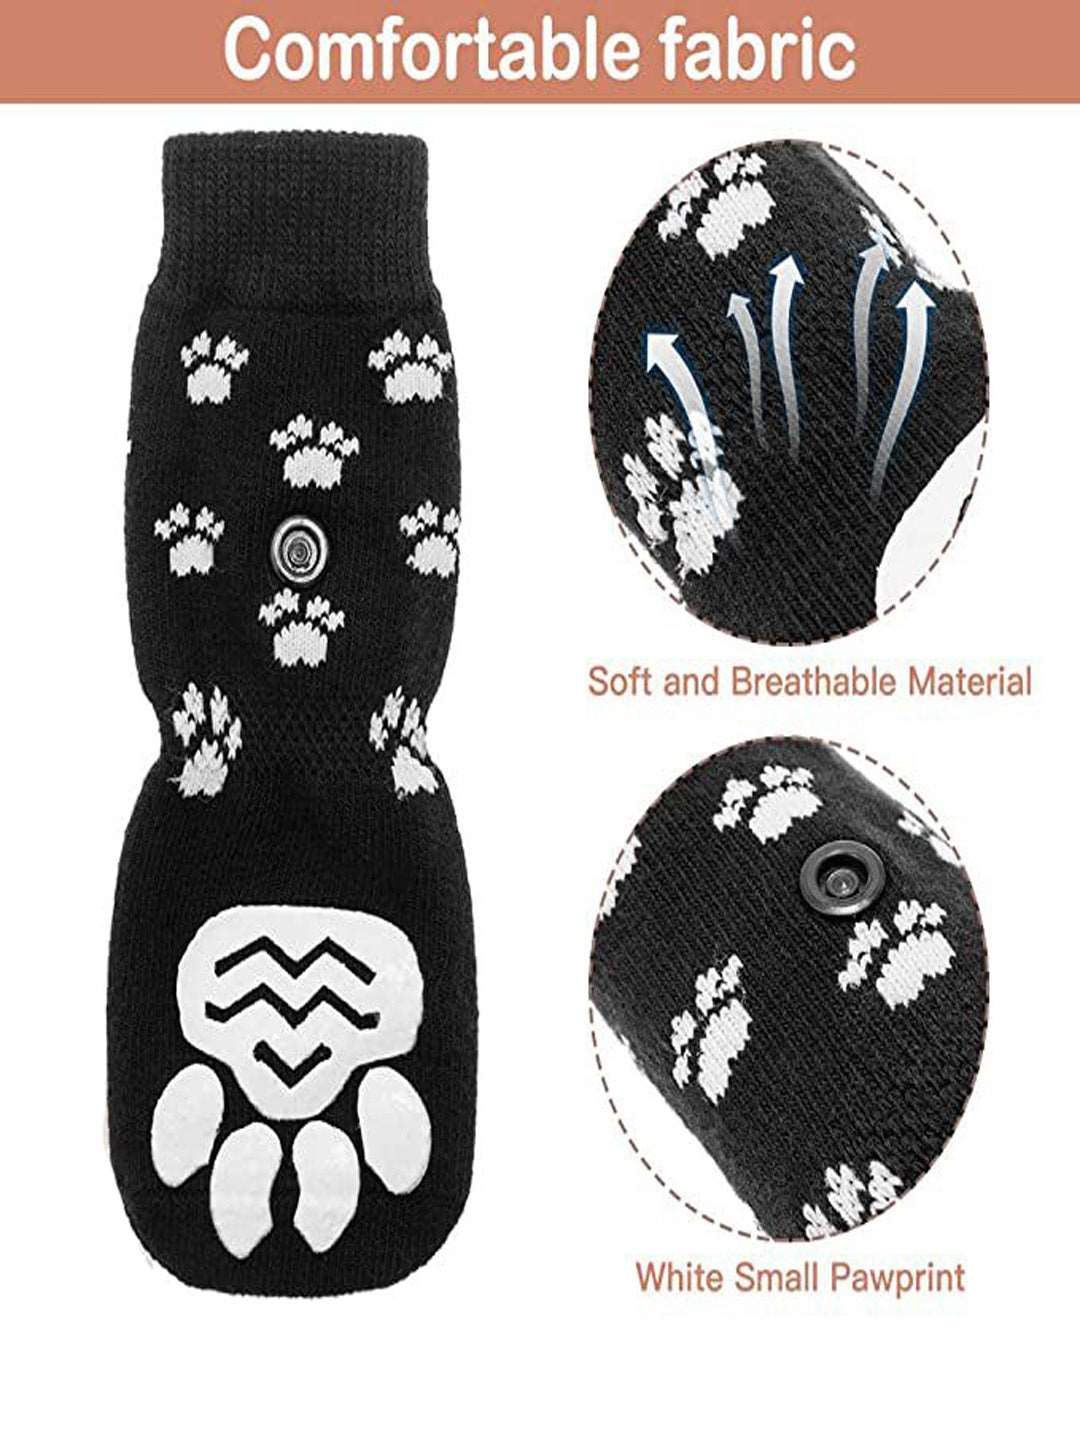 Rypet Anti Slip Dog Socks 3 Pairs - Dog Grip Socks with Straps Traction  Control for Indoor on Hardwood Floor Wear, Pet Paw Protector for Small  Medium